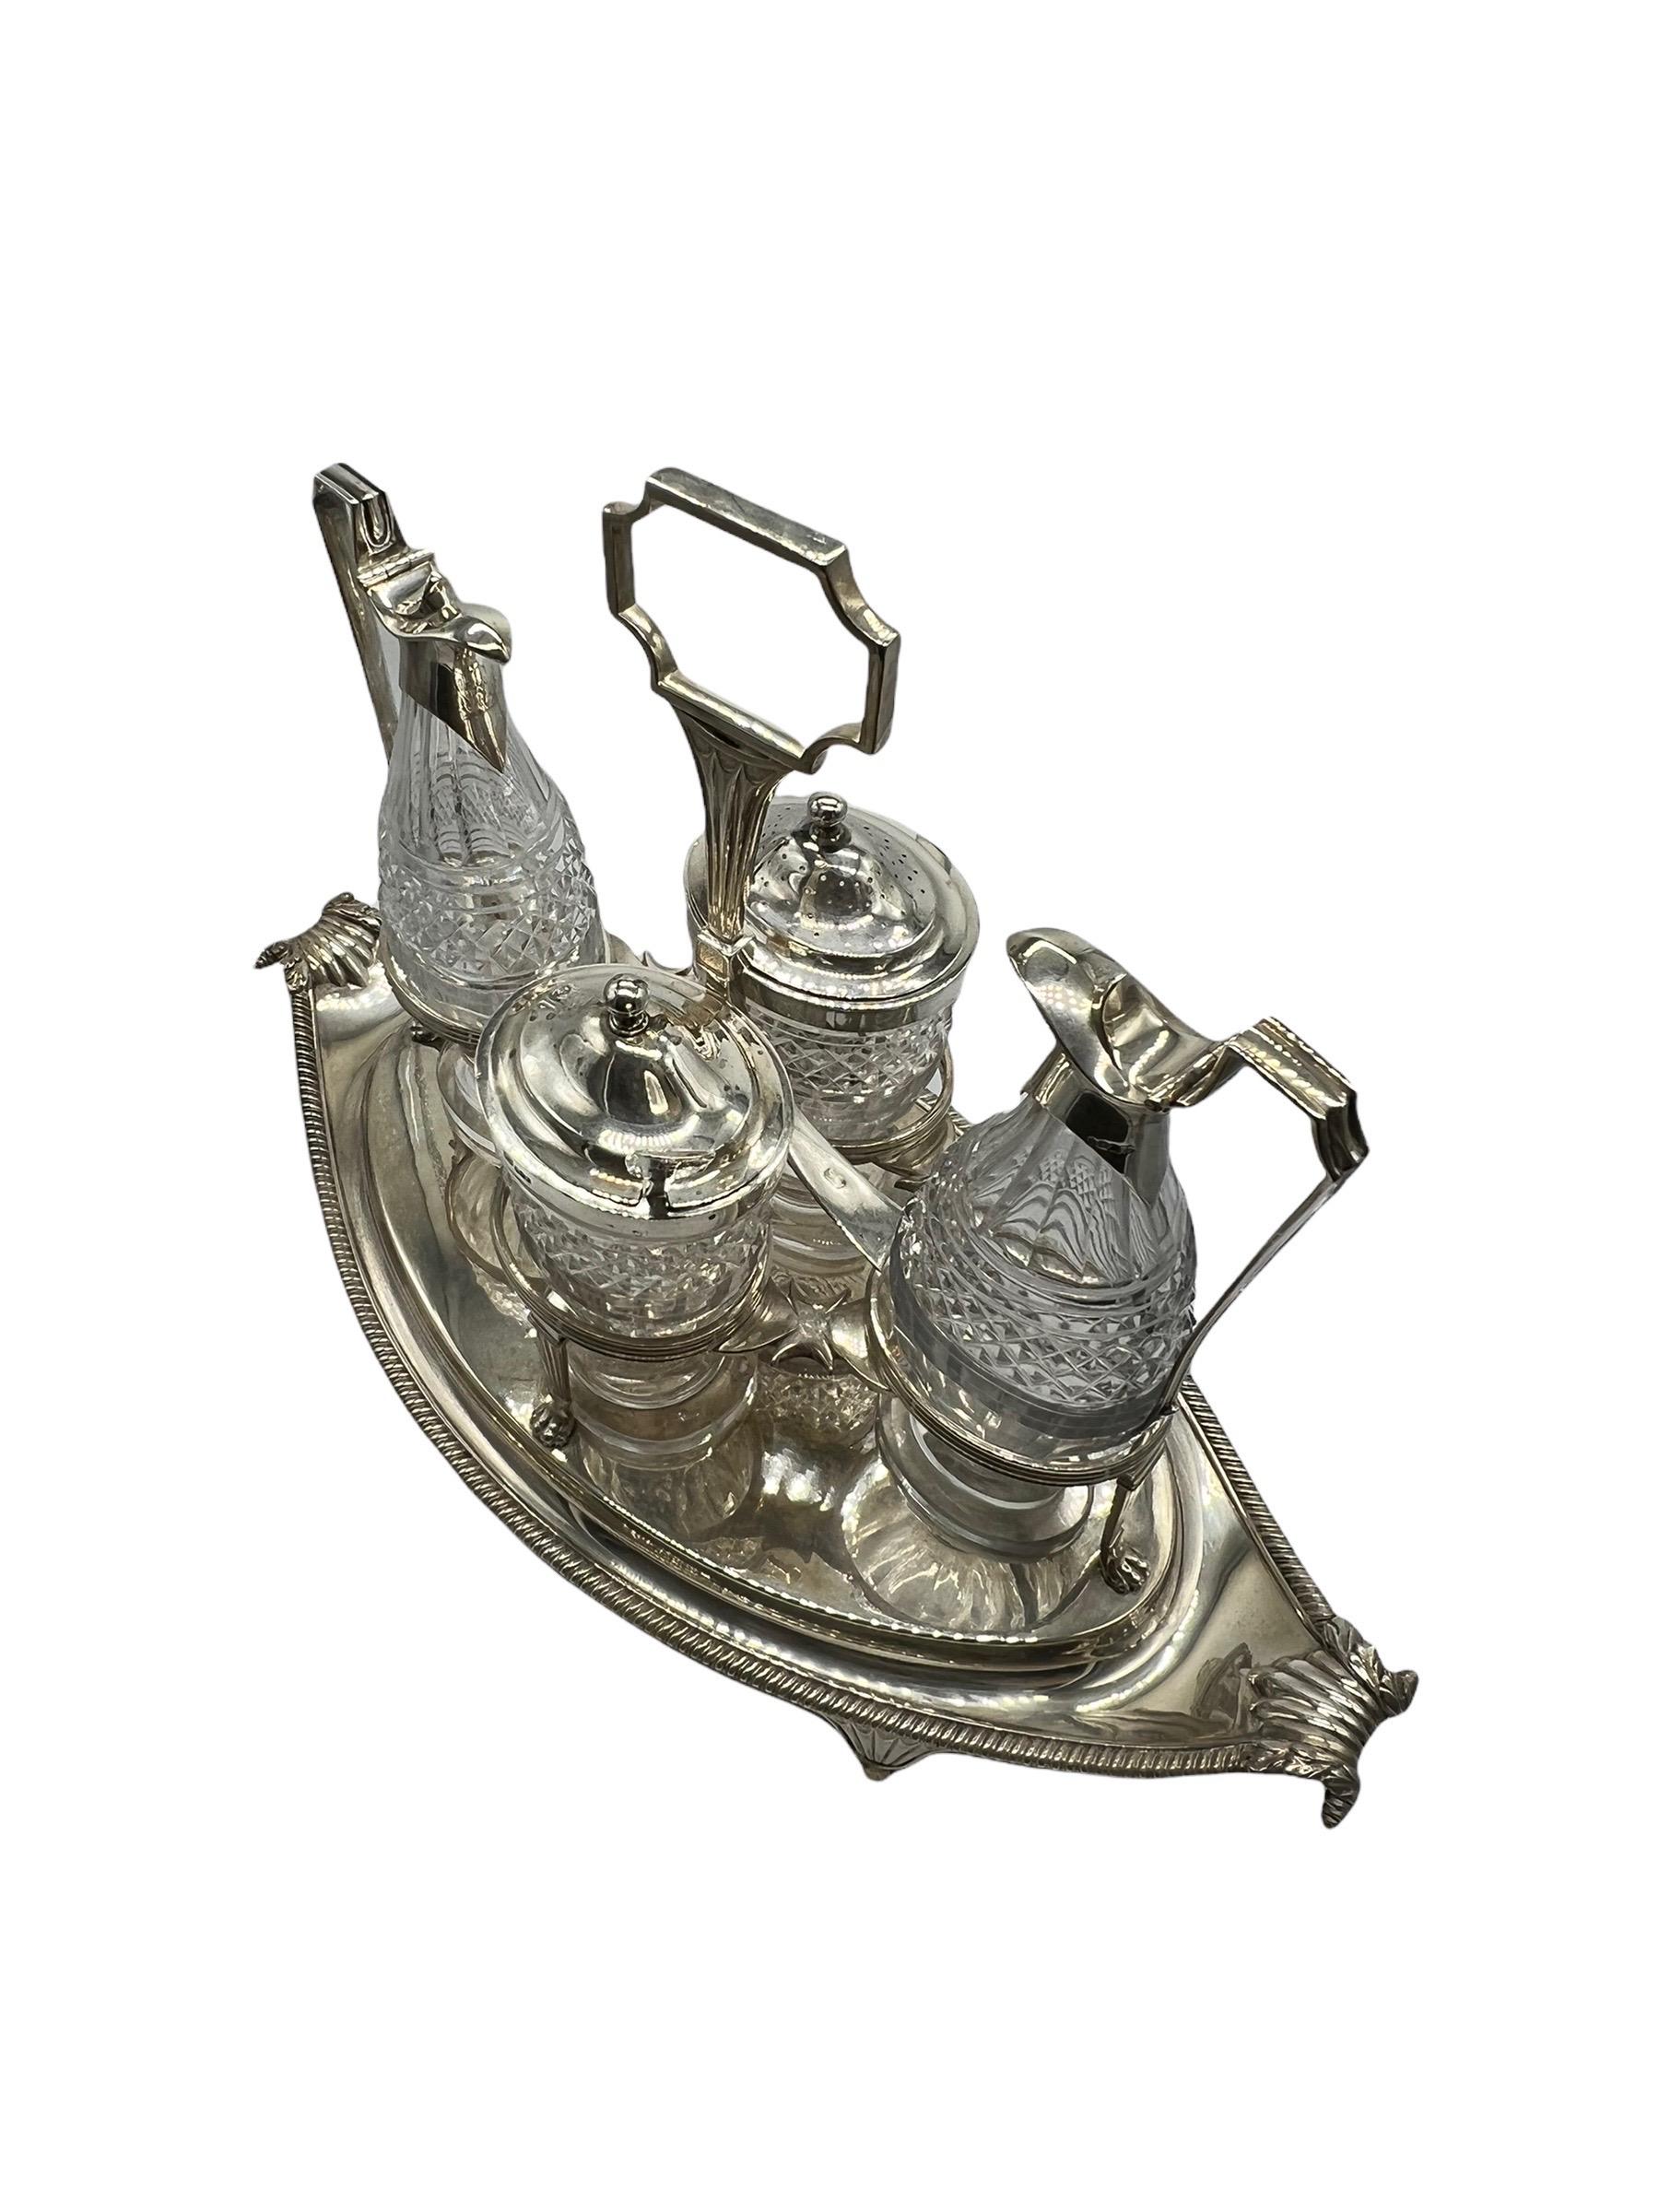 English Sterling Silver and Cut-Glass Cruet Set by Paul Storr, Early 1800s